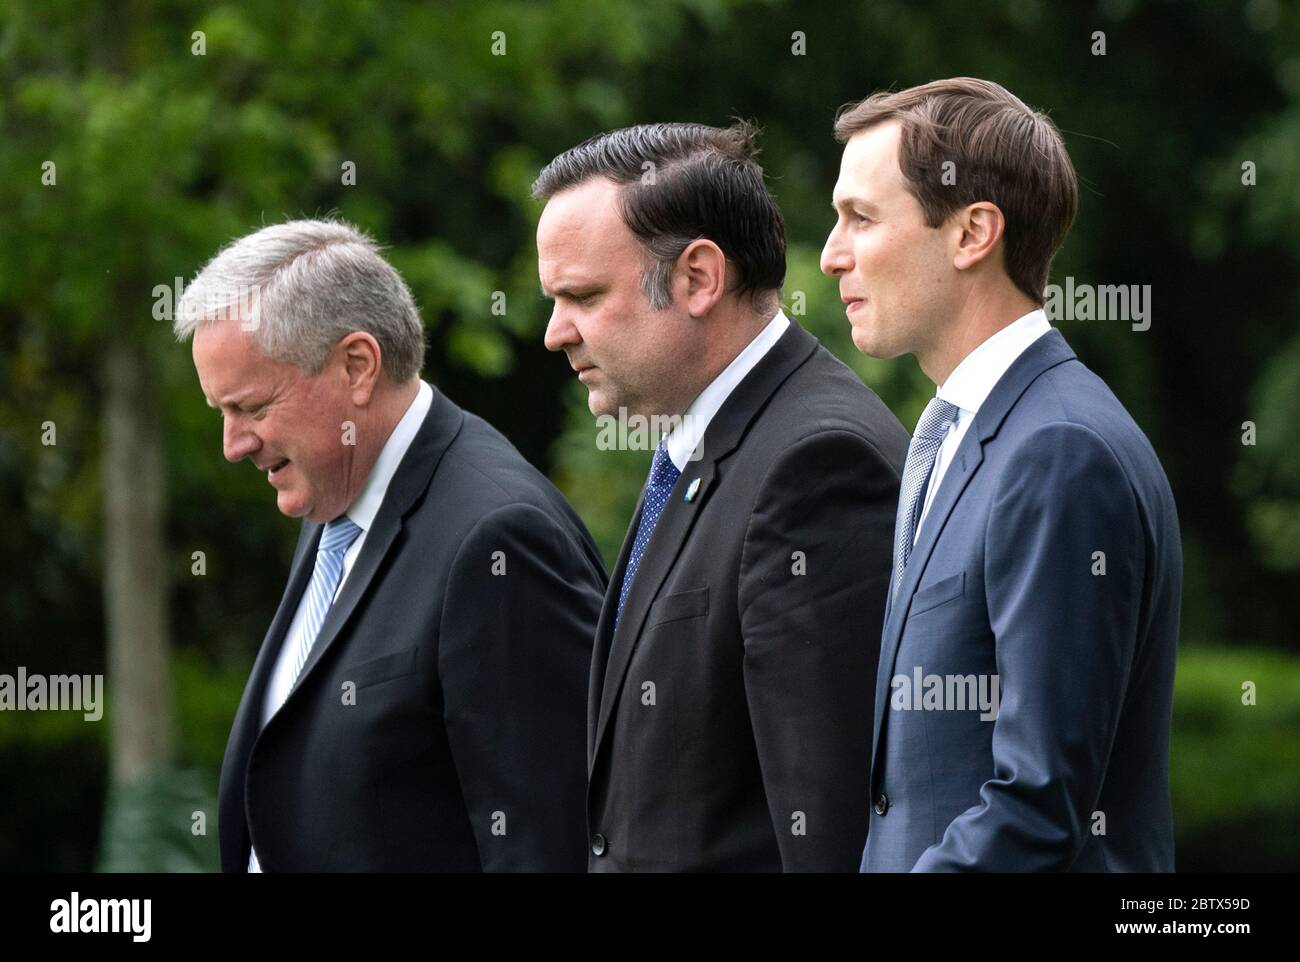 From left to right, Acting Chief of Staff Mark Meadows, Dan Scavino, White House Deputy Chief of Staff for Communications, and Jared Kushner, Presidential advisor and President Trump's son-in-law, depart the White House with President Donald Trump, in Washington, DC on Wednesday, May 27, 2020. President Trump and the First Lady are traveling to NASA's Kennedy Space Center to watch the SpaceX Mission 2 launch. Credit: Kevin Dietsch/Pool via CNP | usage worldwide Stock Photo